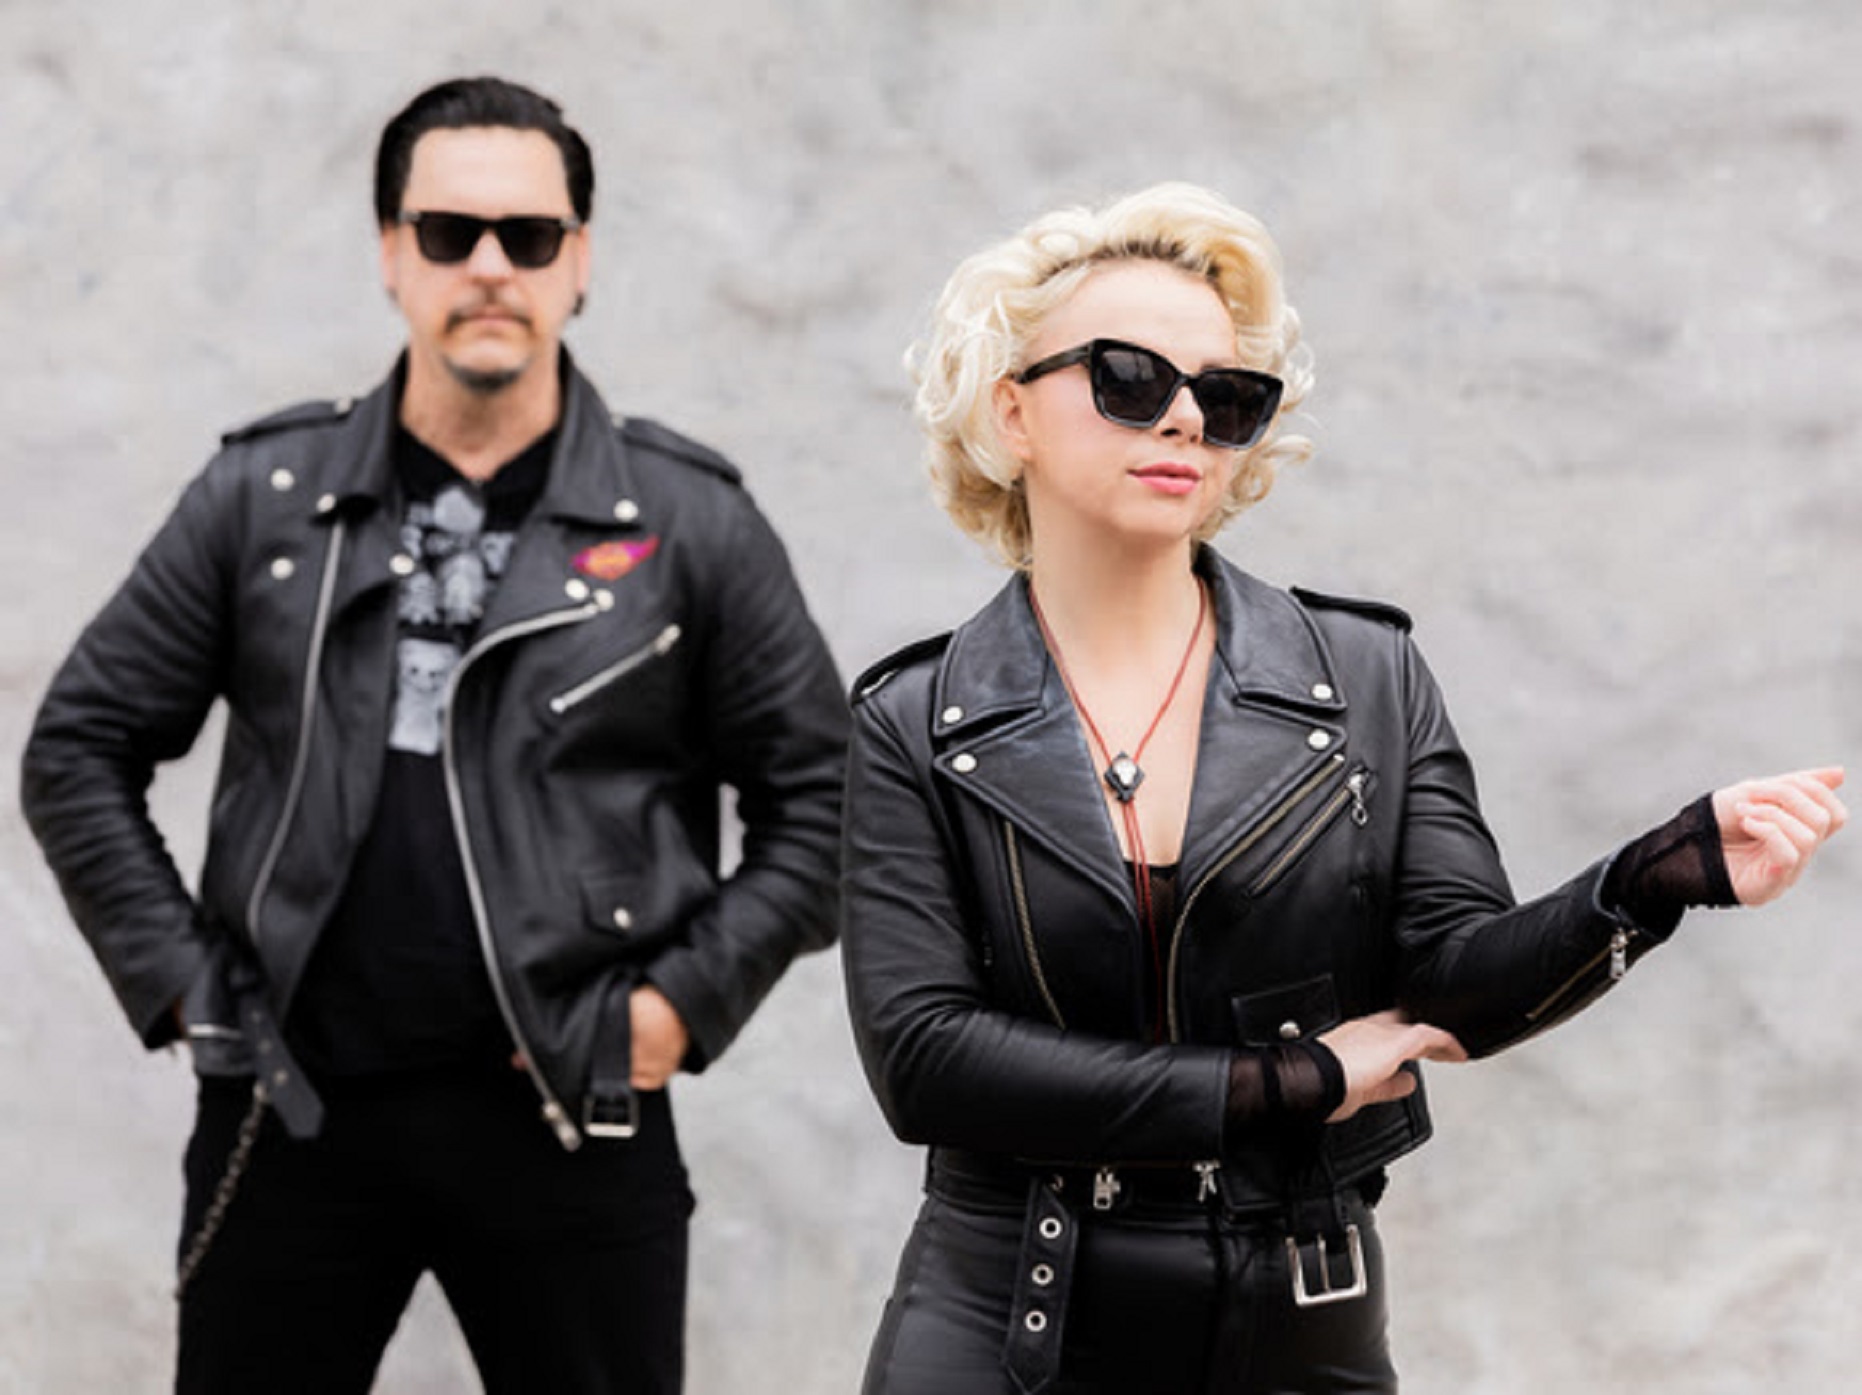 Samantha Fish and Jesse Dayton Release Bold, Unflinching Track "Settle For Less"